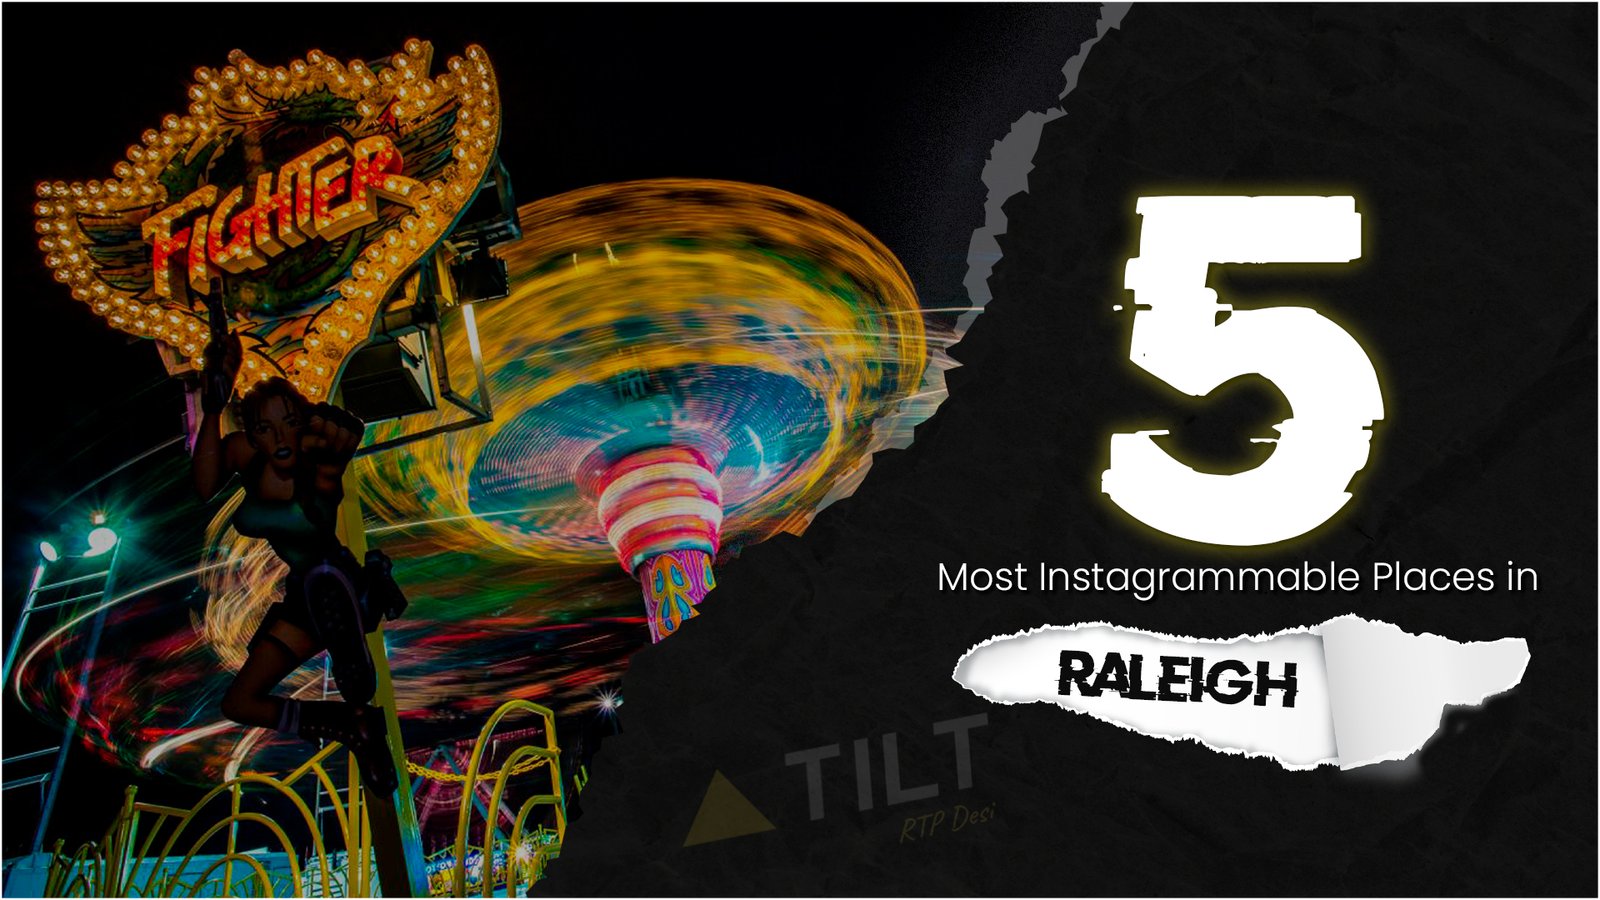 Instagrammable Places in Raleigh - Triangle tilt